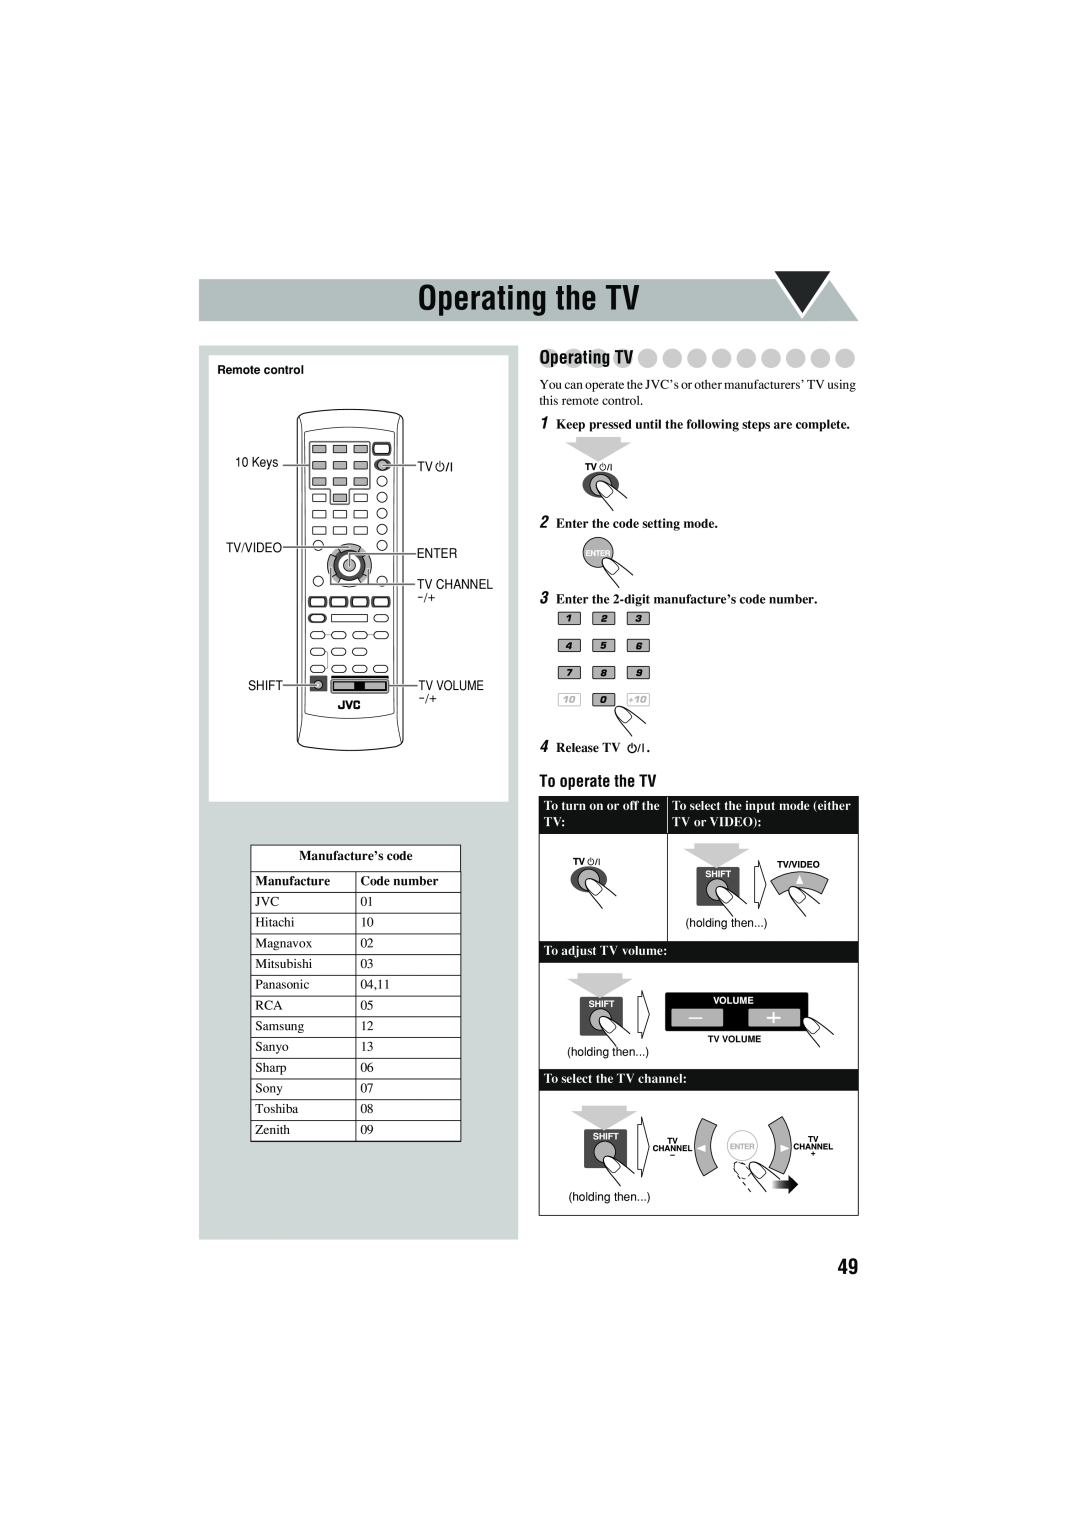 JVC CA-MXJD8 manual Operating the TV, Operating TV, To operate the TV, Manufacture’s code, Code number 